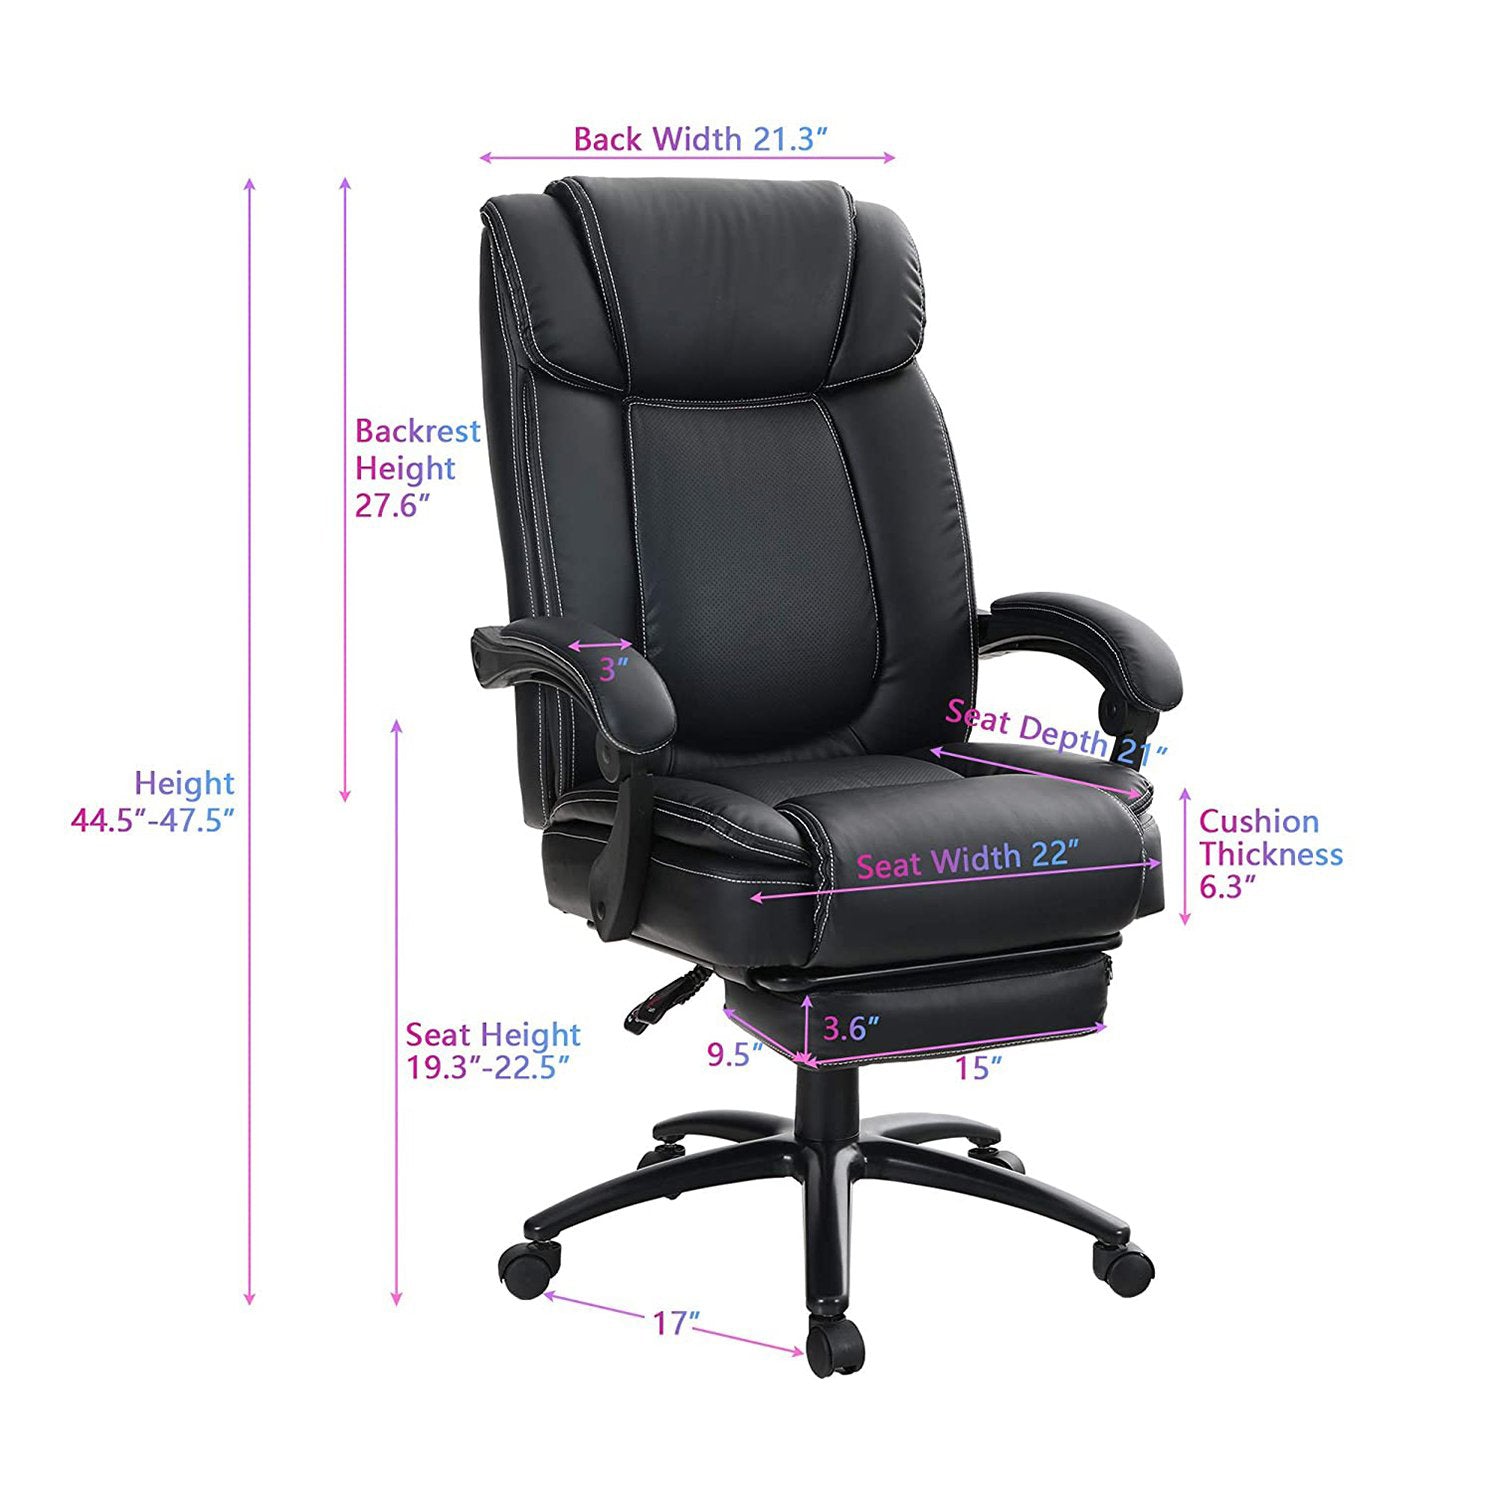  PHI VILLA Office Chair with High Back,3 Adjusters for